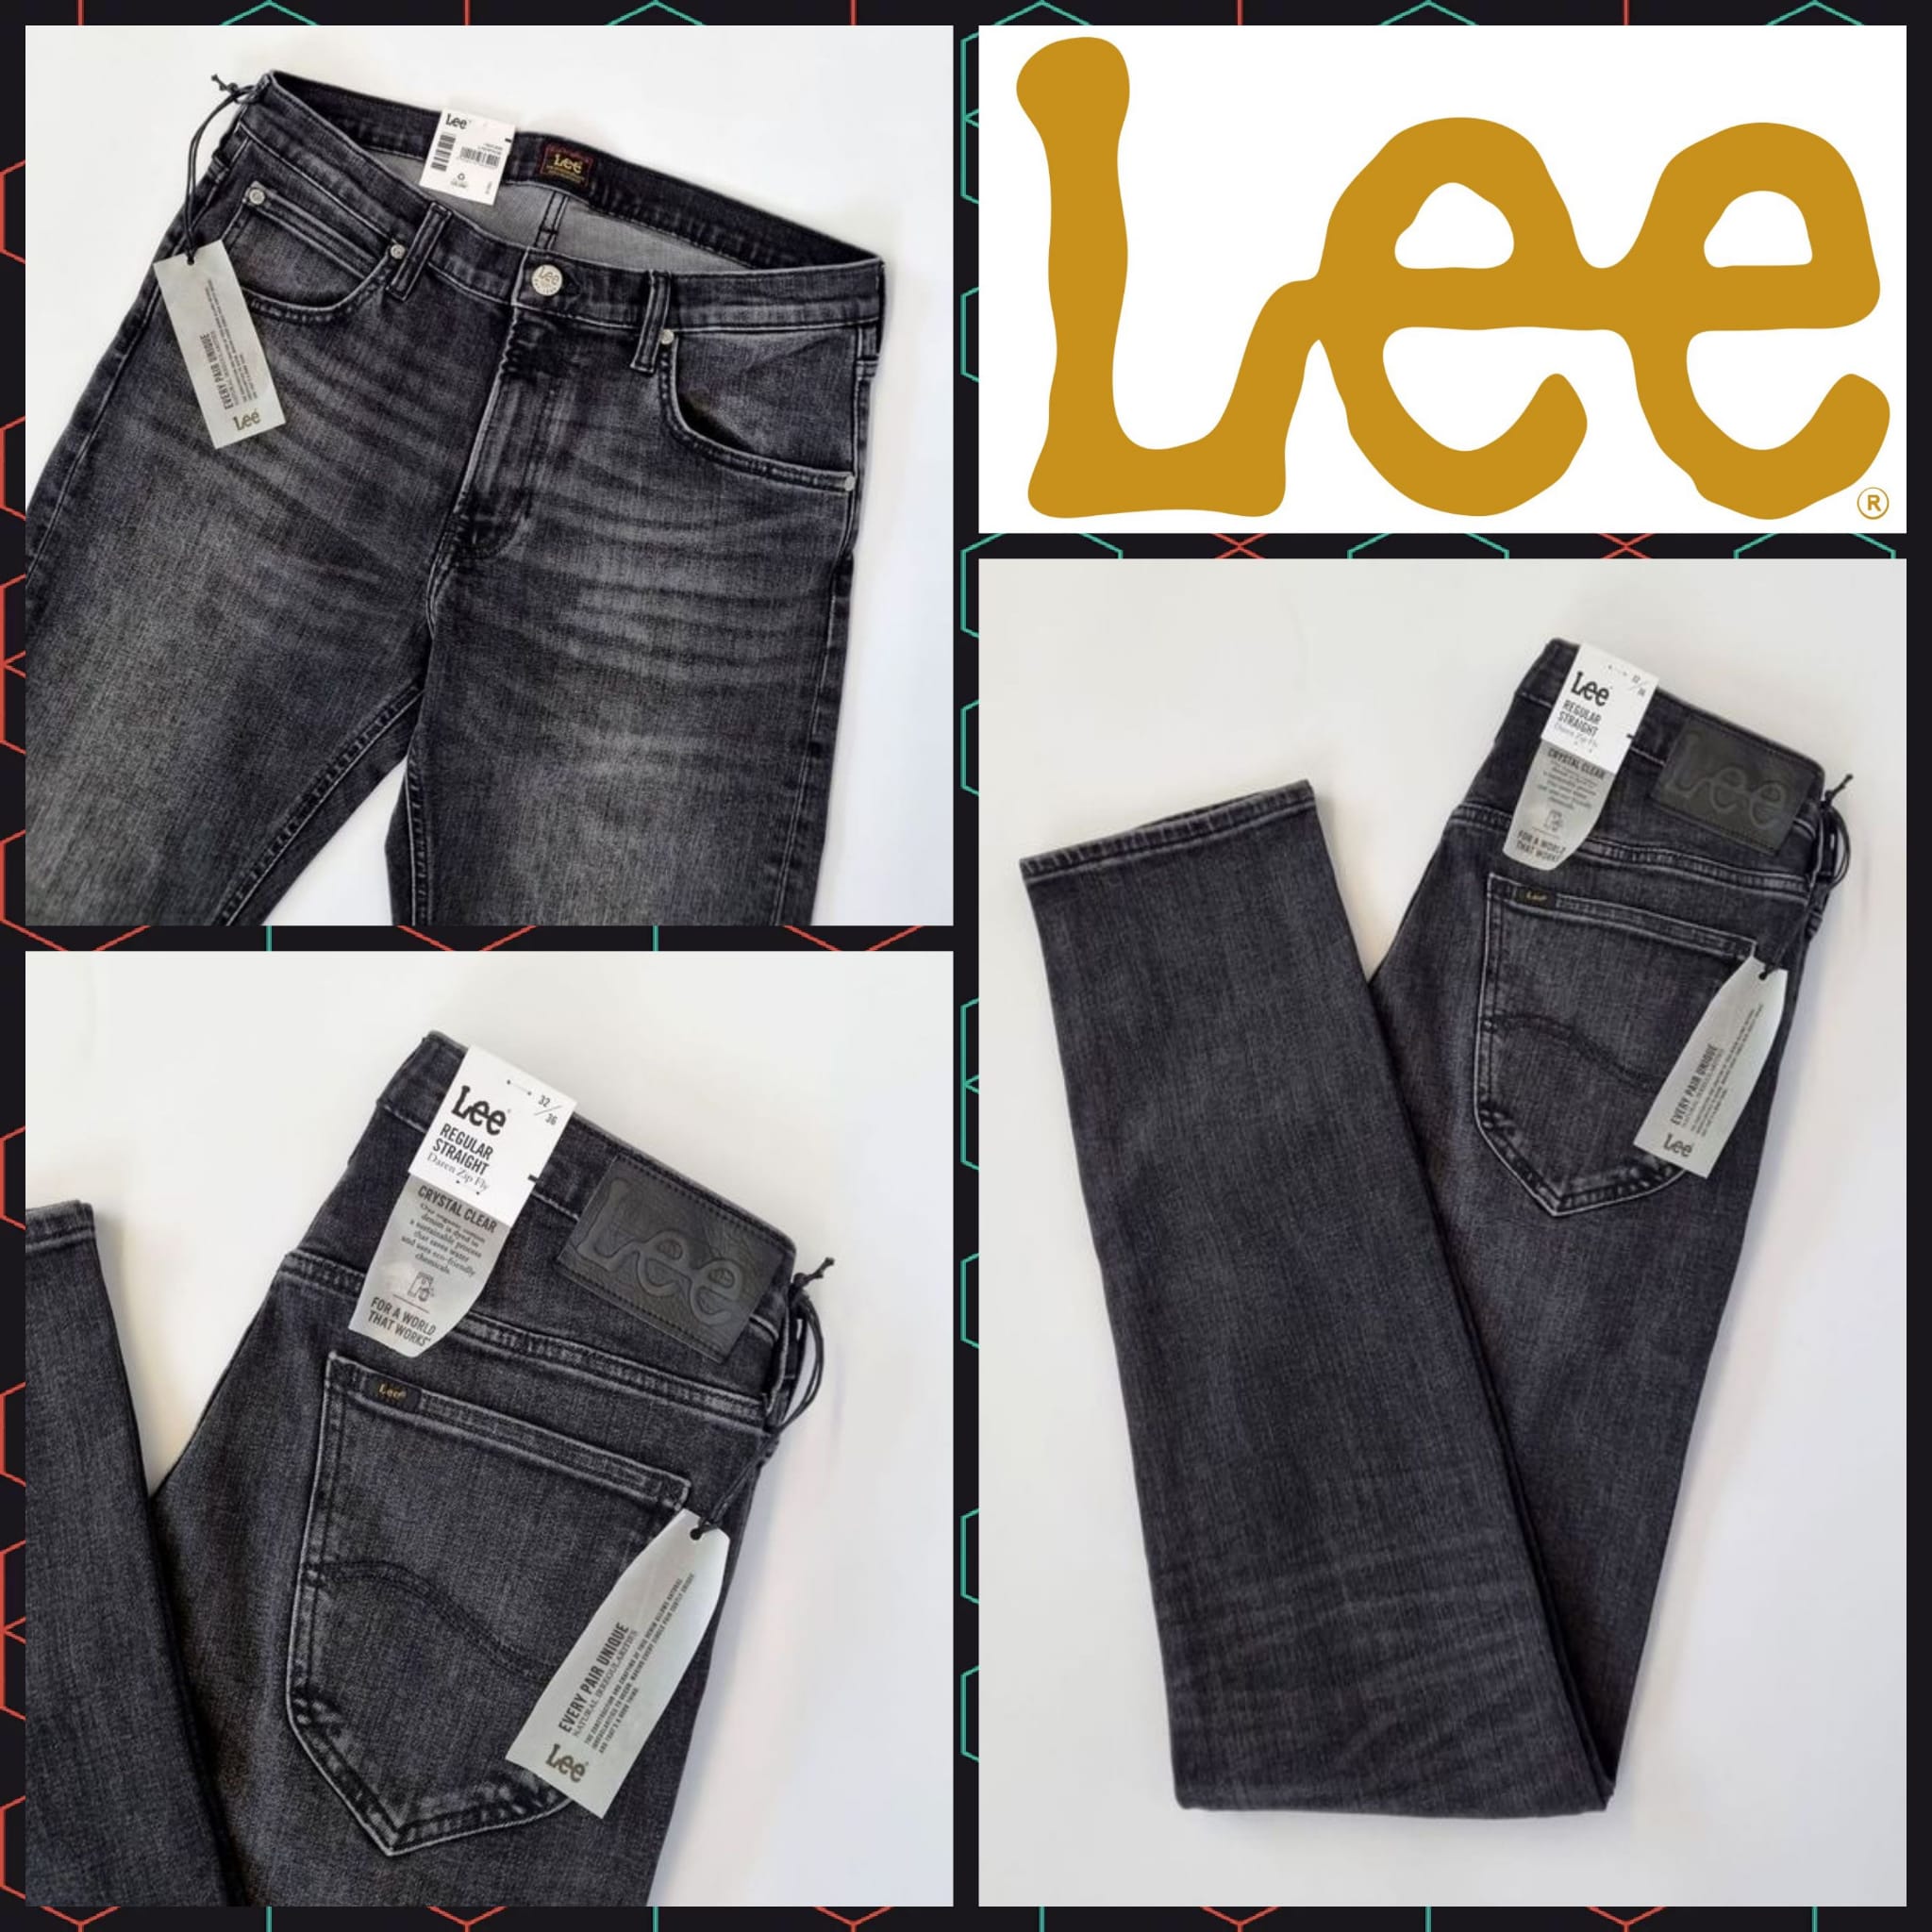 Men's jeans from Lee